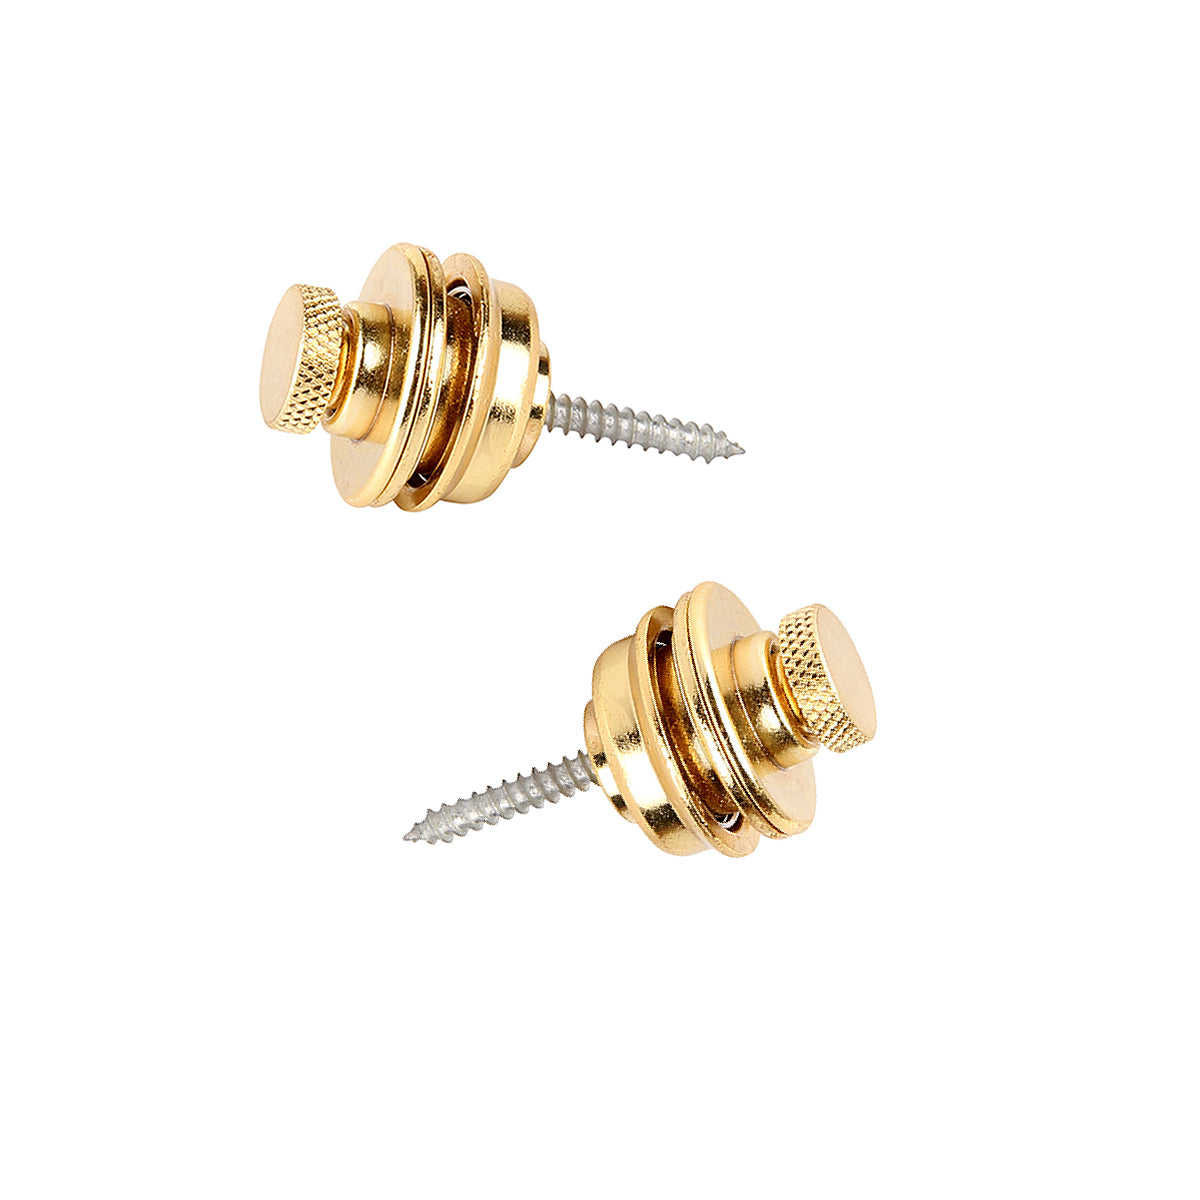 Musiclily Metal Big Strap Locks Buttons for Guitar or Bass,Gold(2 Pieces)